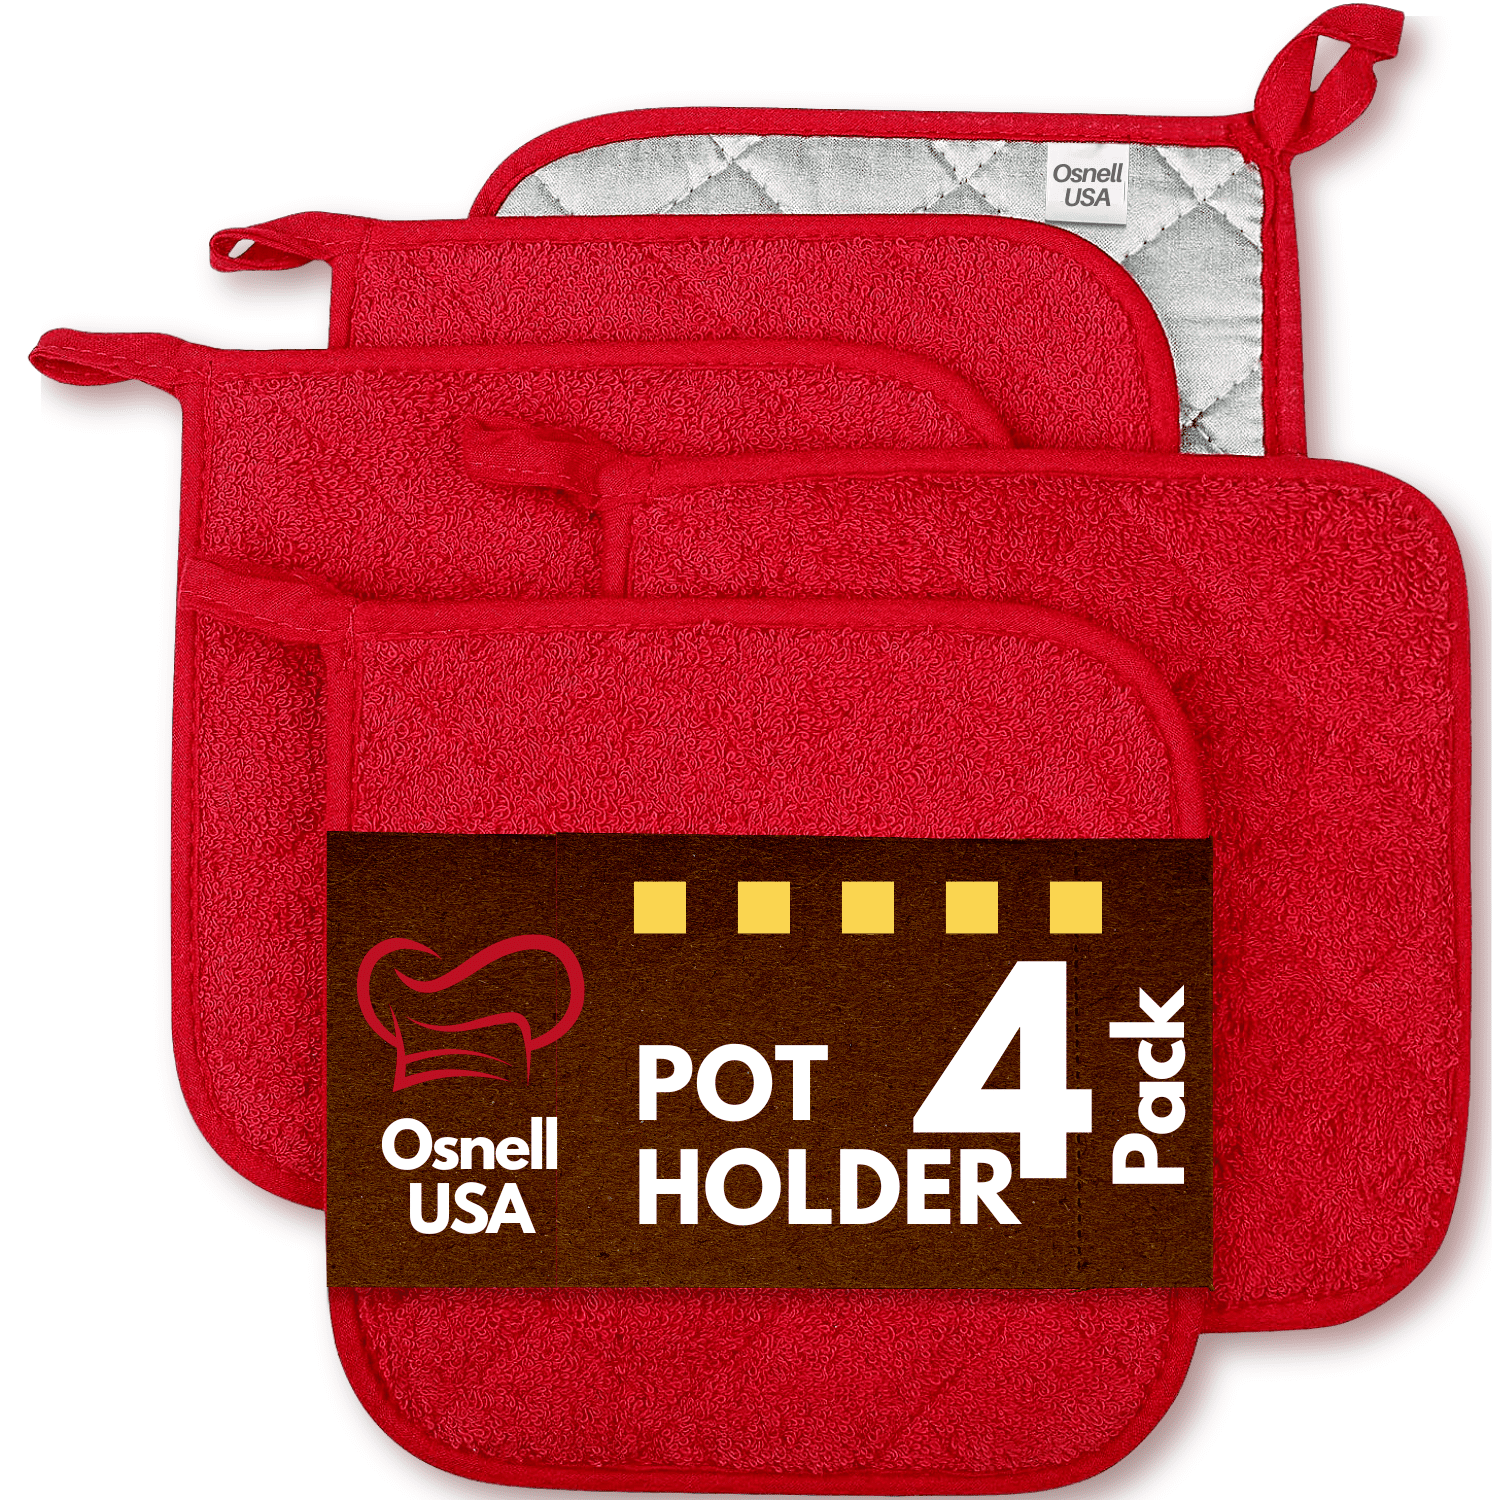 12 Pack of Cotton Kitchen Pot Holders 7 X 7 Wholesale Bulk Pricing